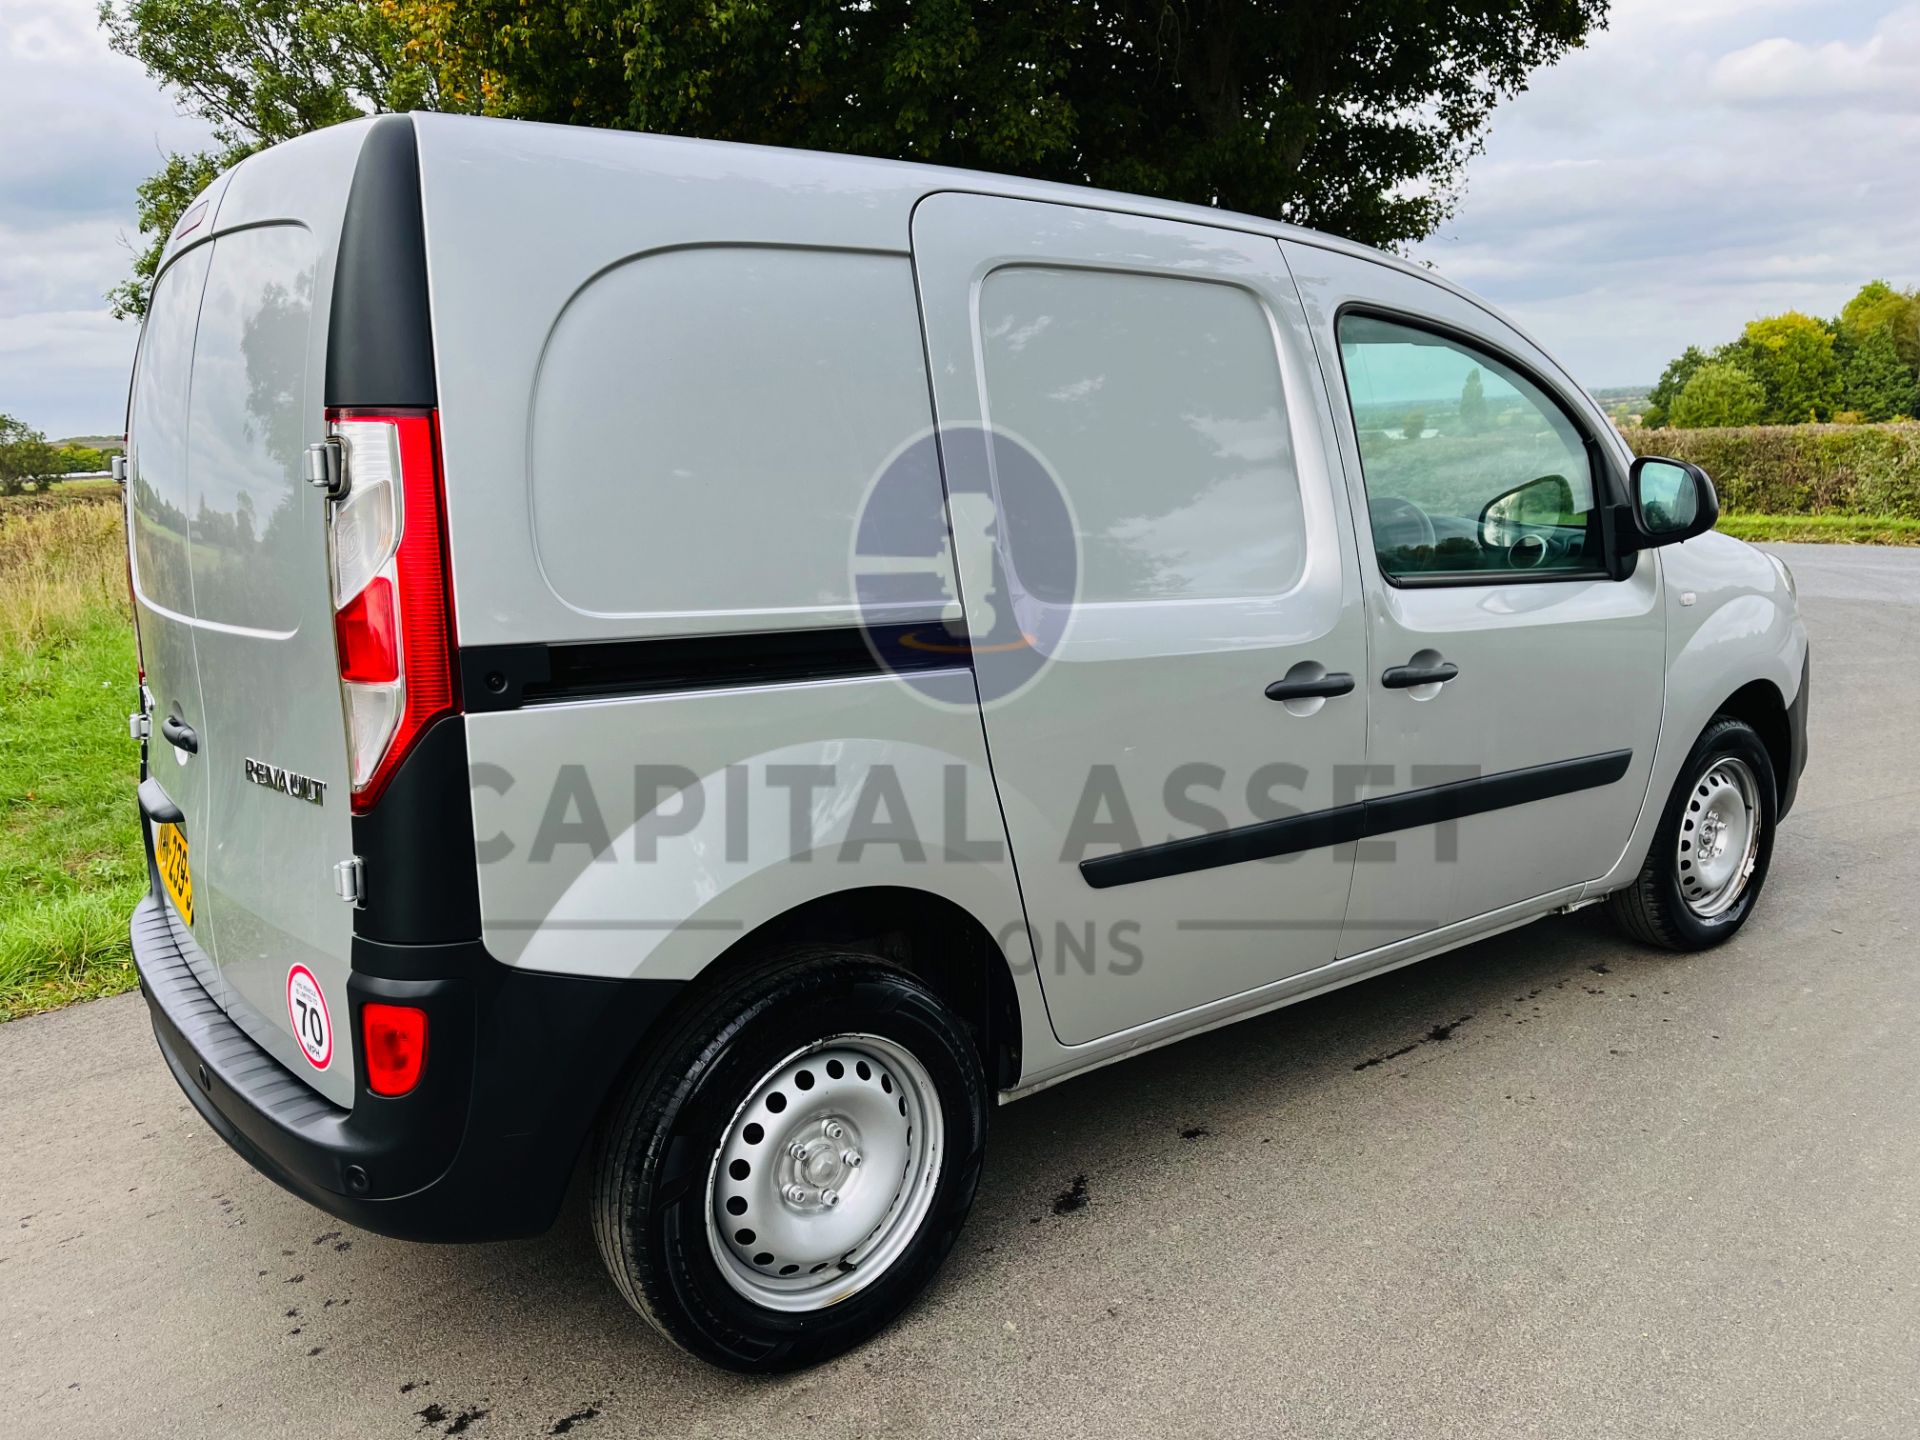 (ON SALE) RENAULT KANGOO 1.5DCI "BUSINESS EDITION" FSH (18 YEAR) EURO (AC) ELEC PACK TWIN SIDE DOORS - Image 11 of 22